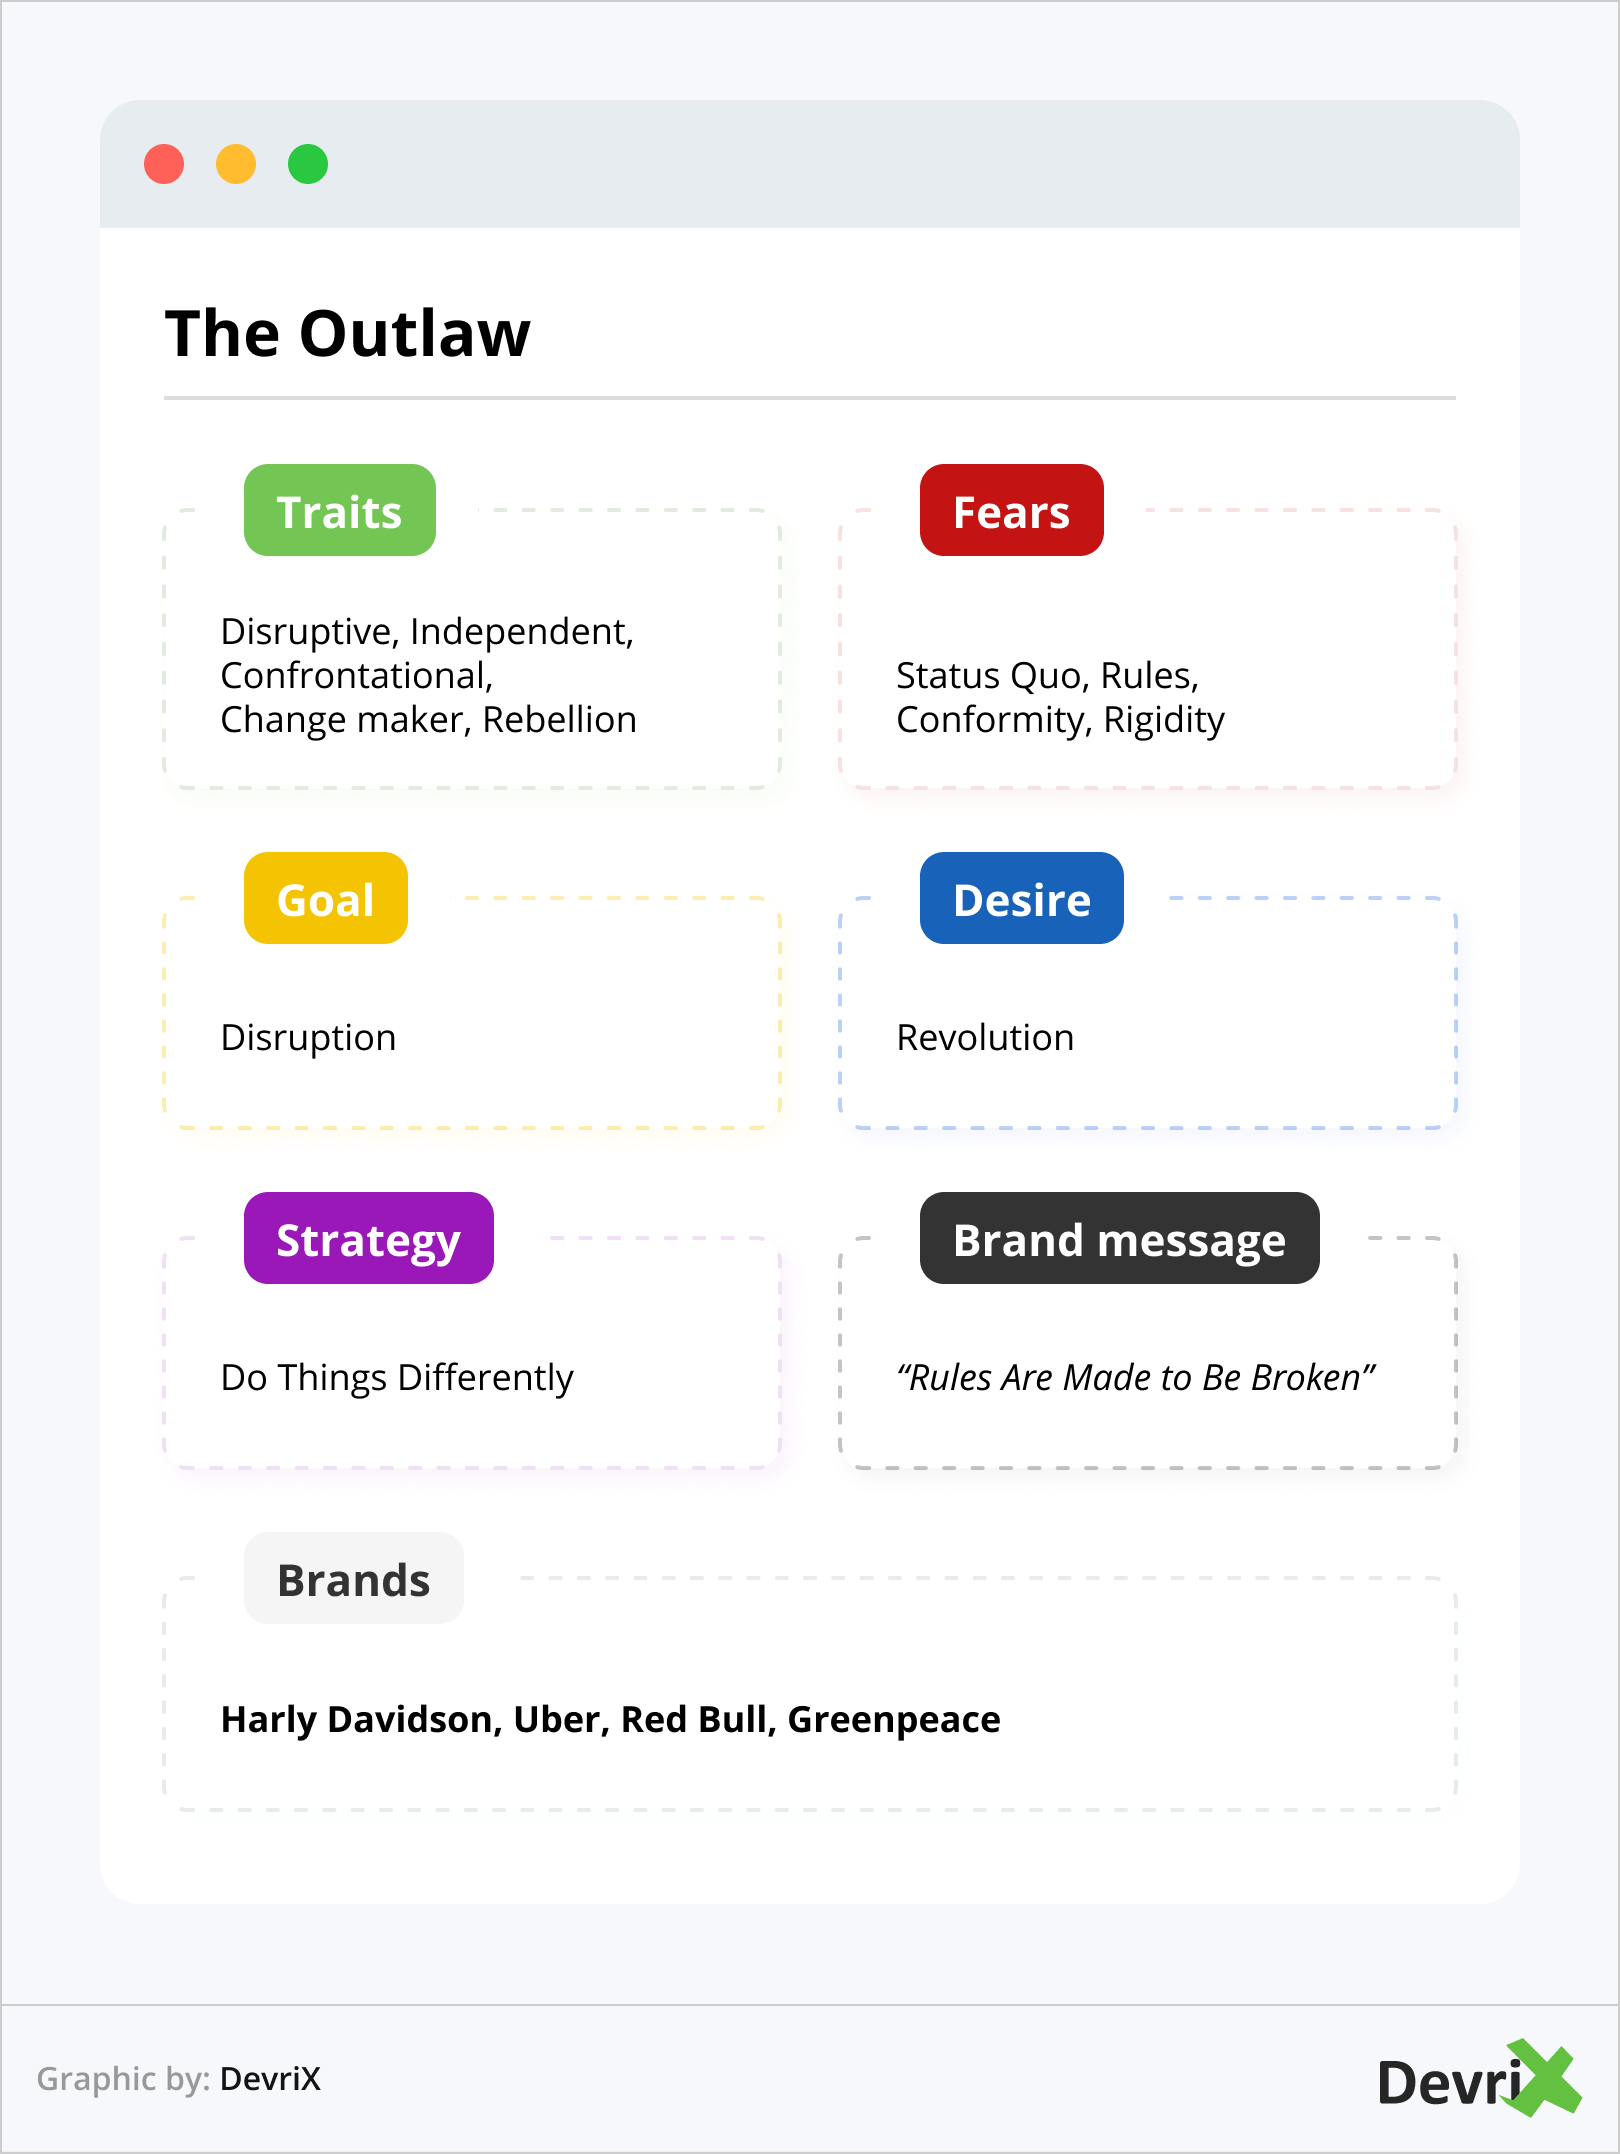 Brand Archetype - The Outlaw